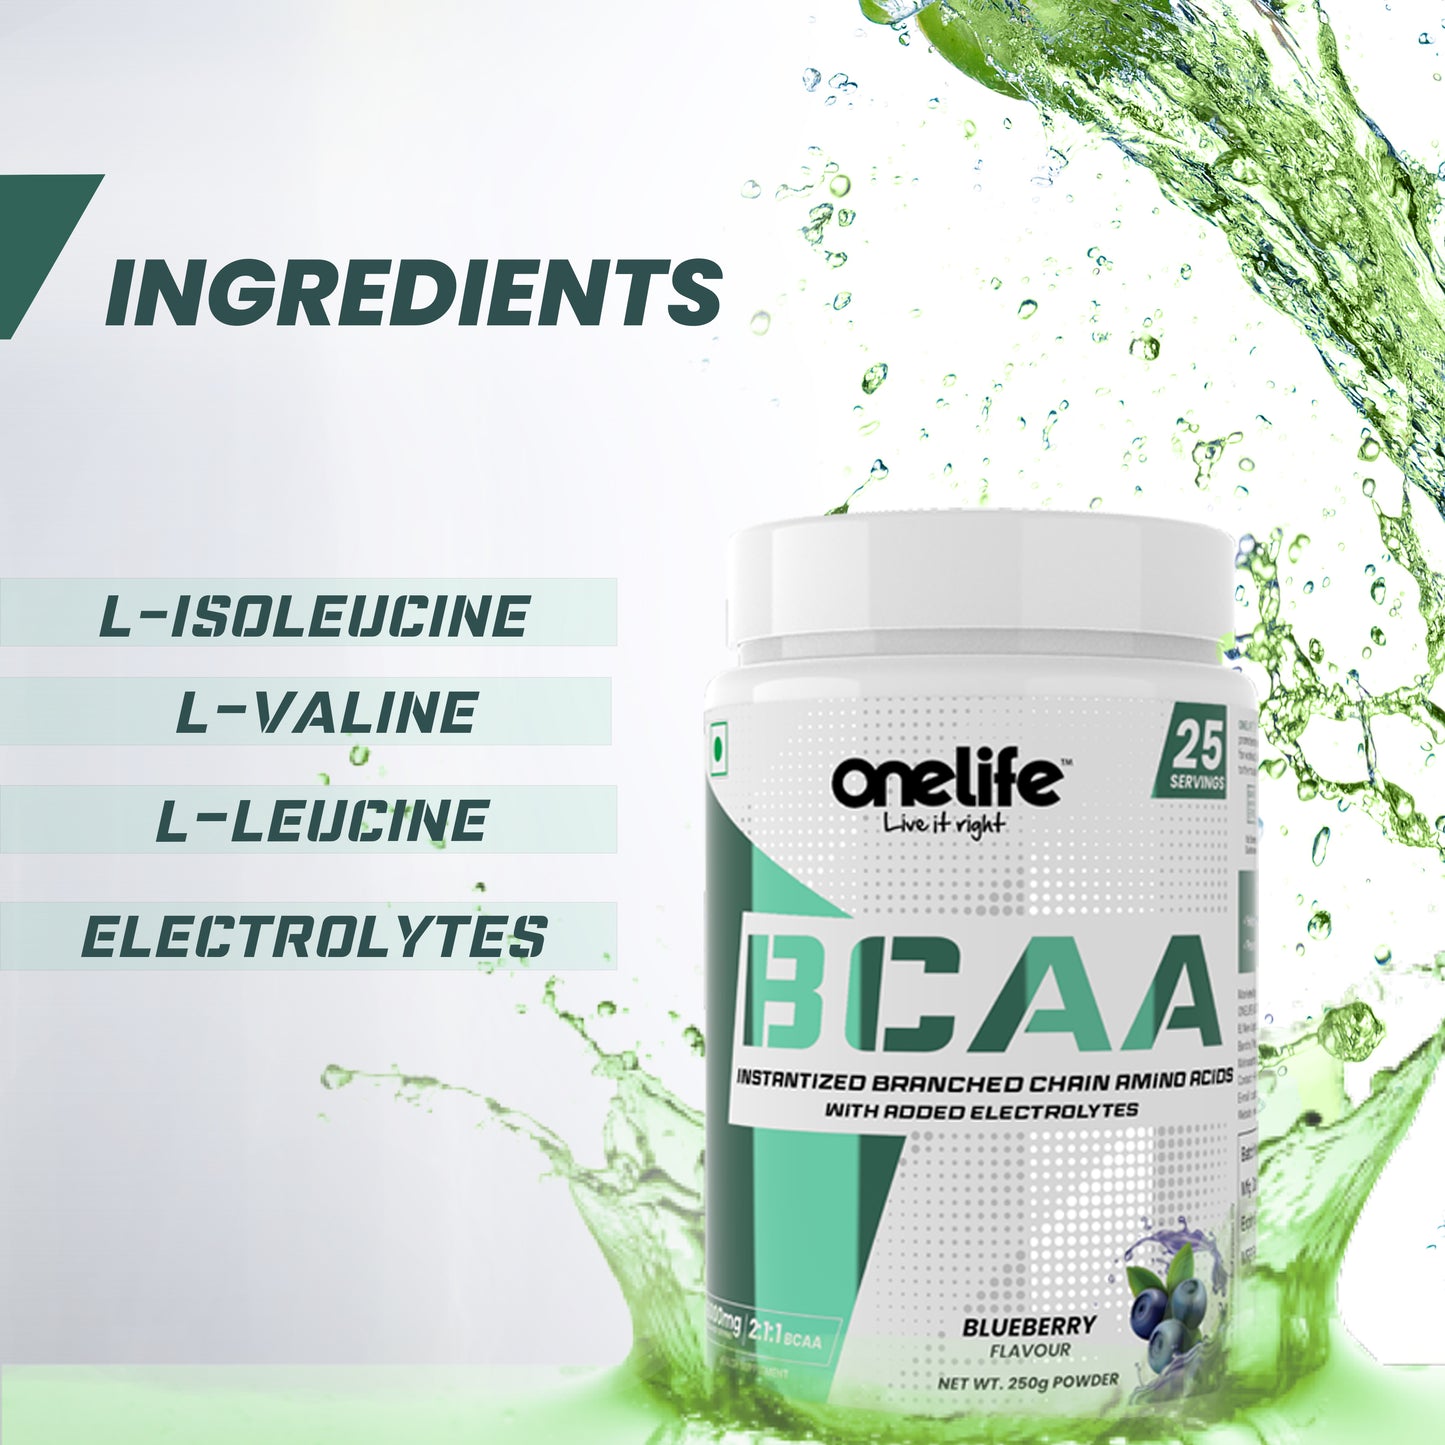 Blueberry BCAA - 250gms (6000mg BCAA, 2:1:1) per serving for Intra workout & Post Workout